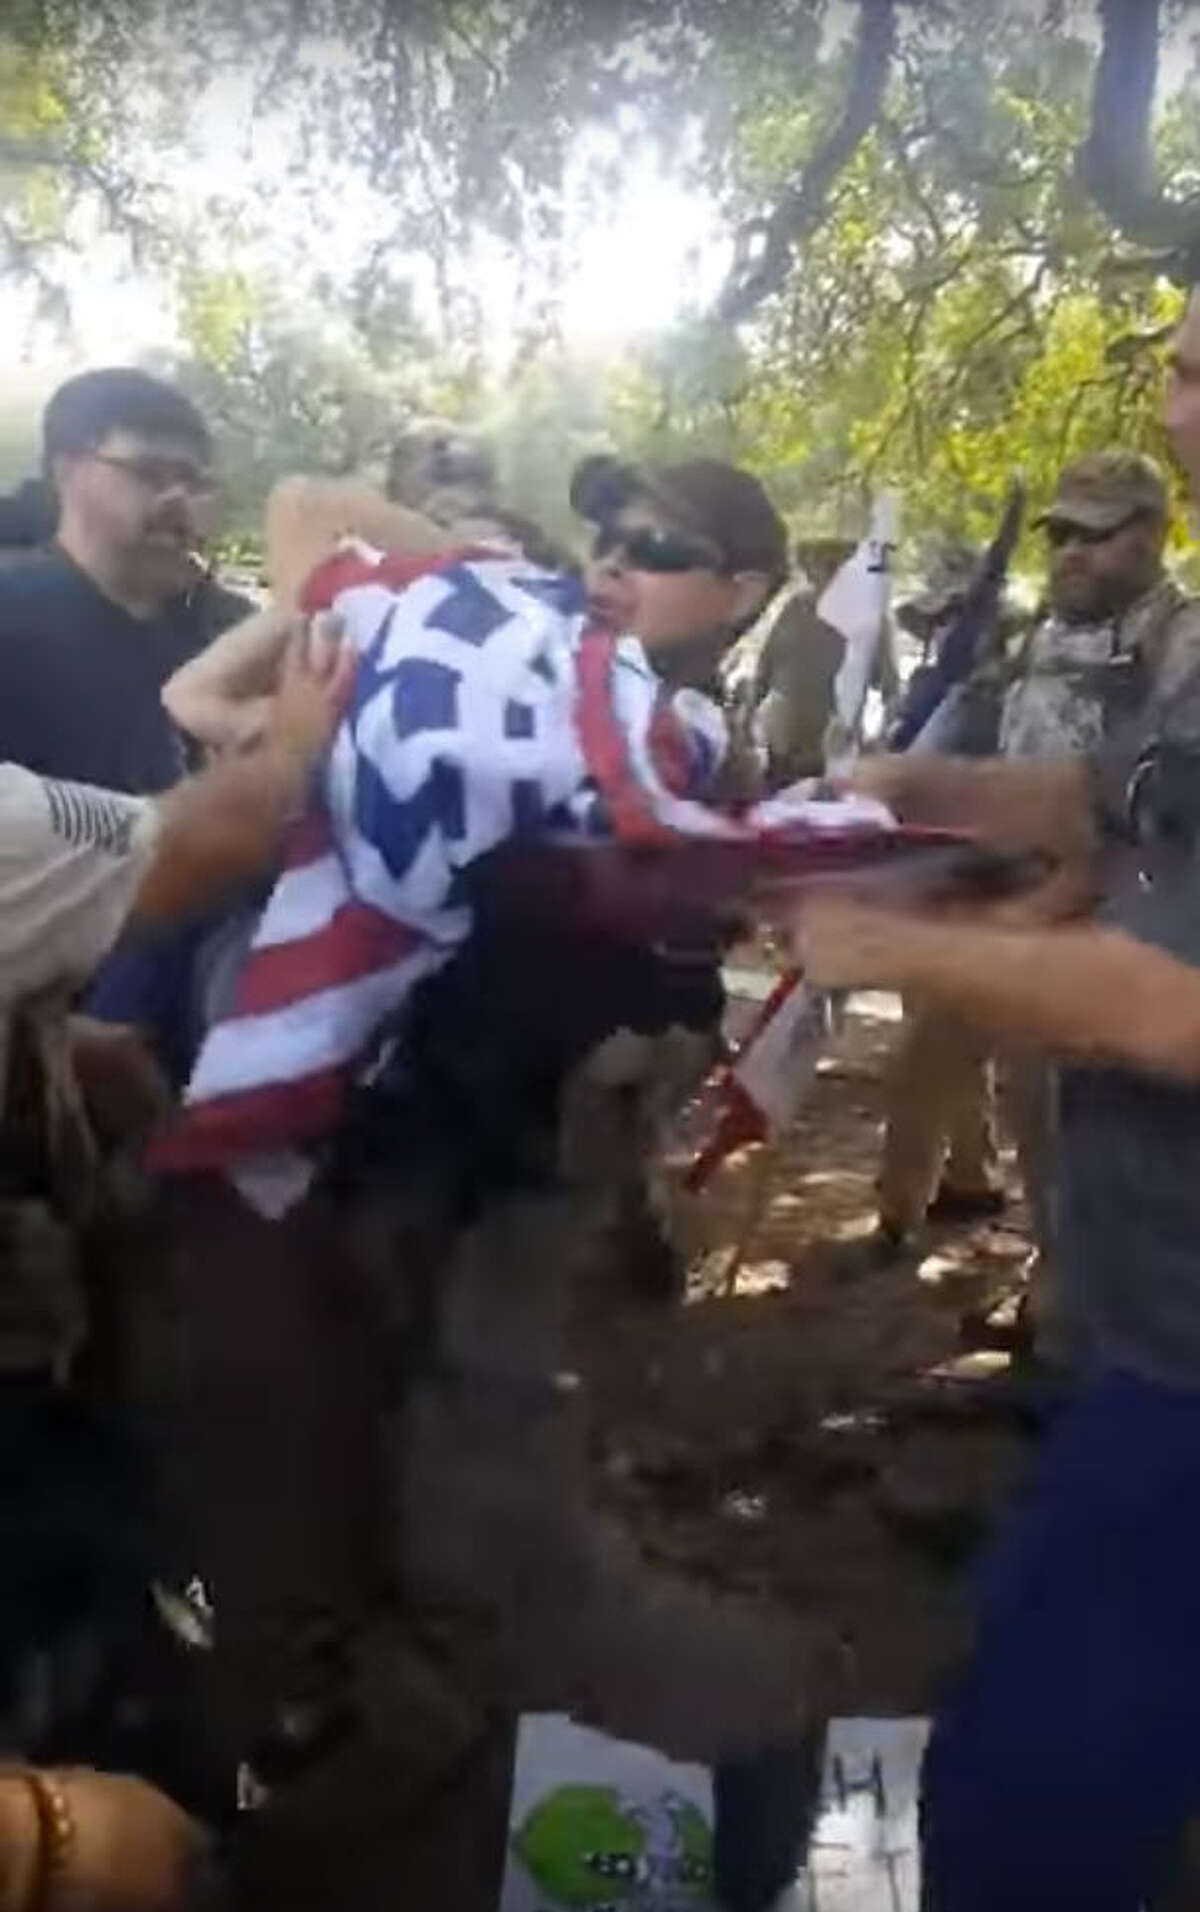 An image from an altercation during a demonstration supporting the Sam Houston statue in Houston's Hermann Park on Saturday, June 10, 2017. (Screenshot from YouTube)